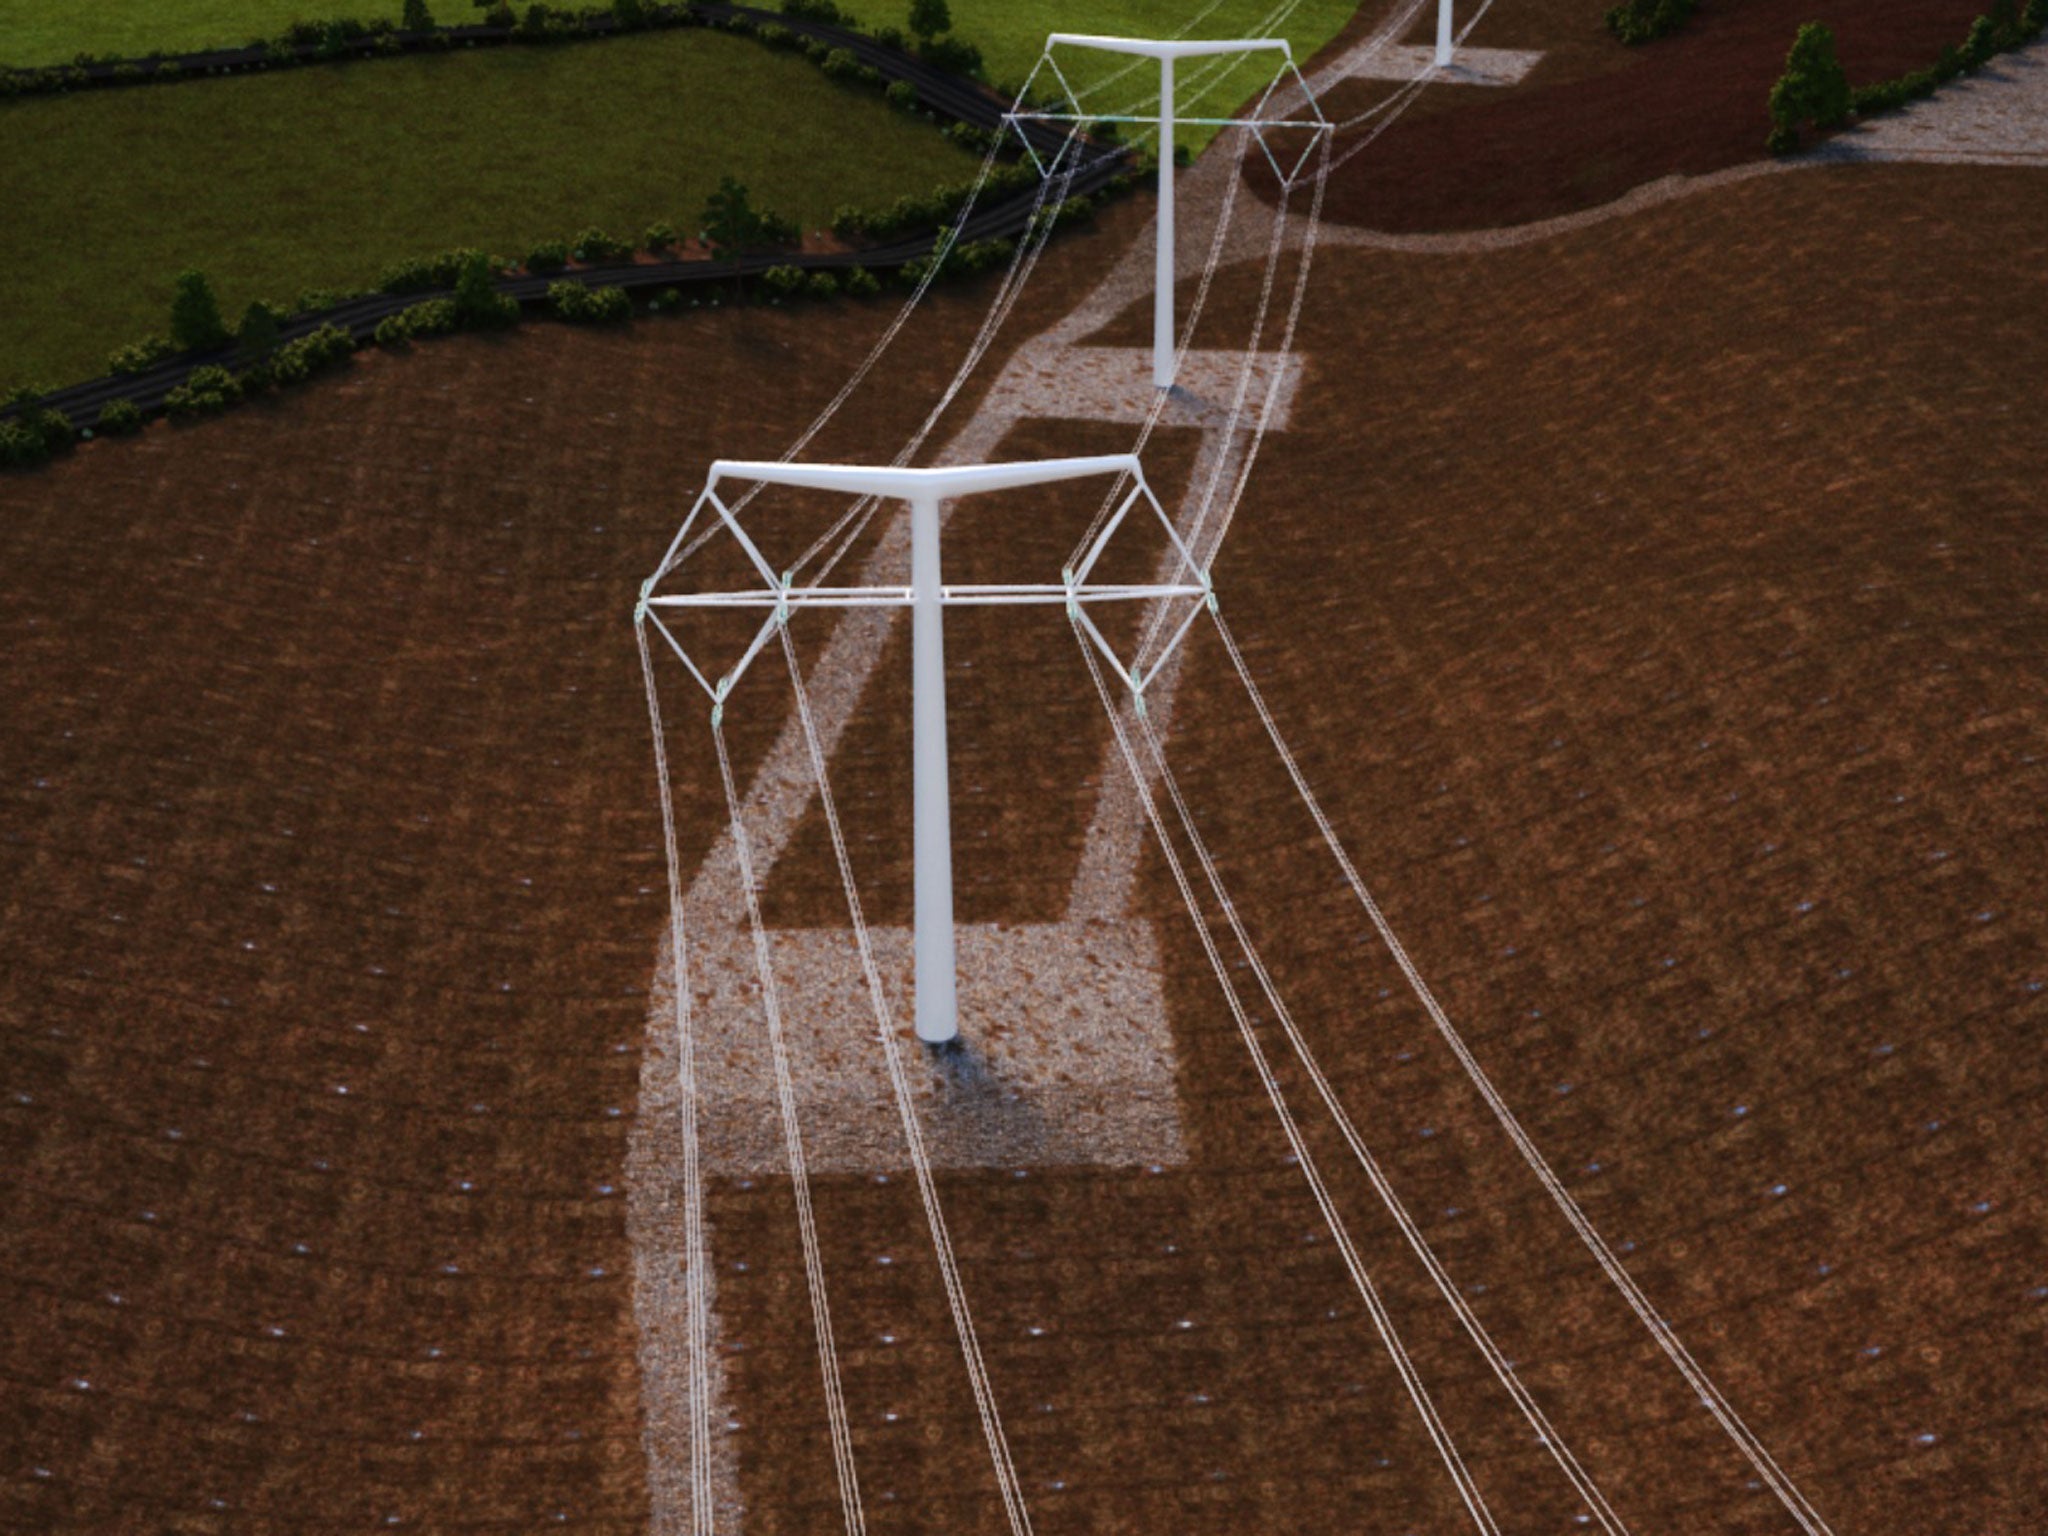 The Danish designs are said to create less 'visual noise' than the traditional British pylon